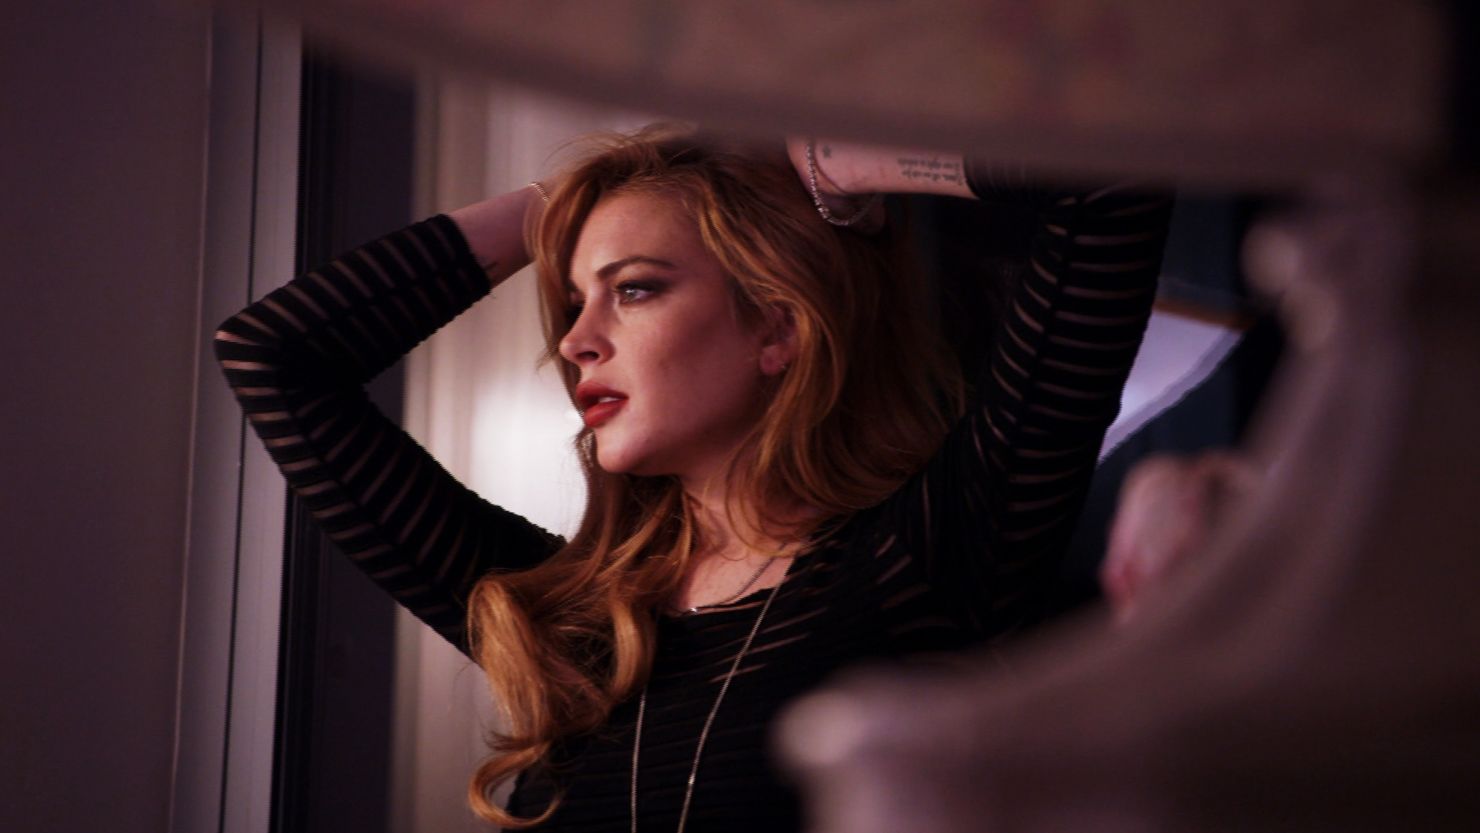 Lindsay Lohan chronicles her focus on sobriety in OWN's "Lindsay" docu-series.